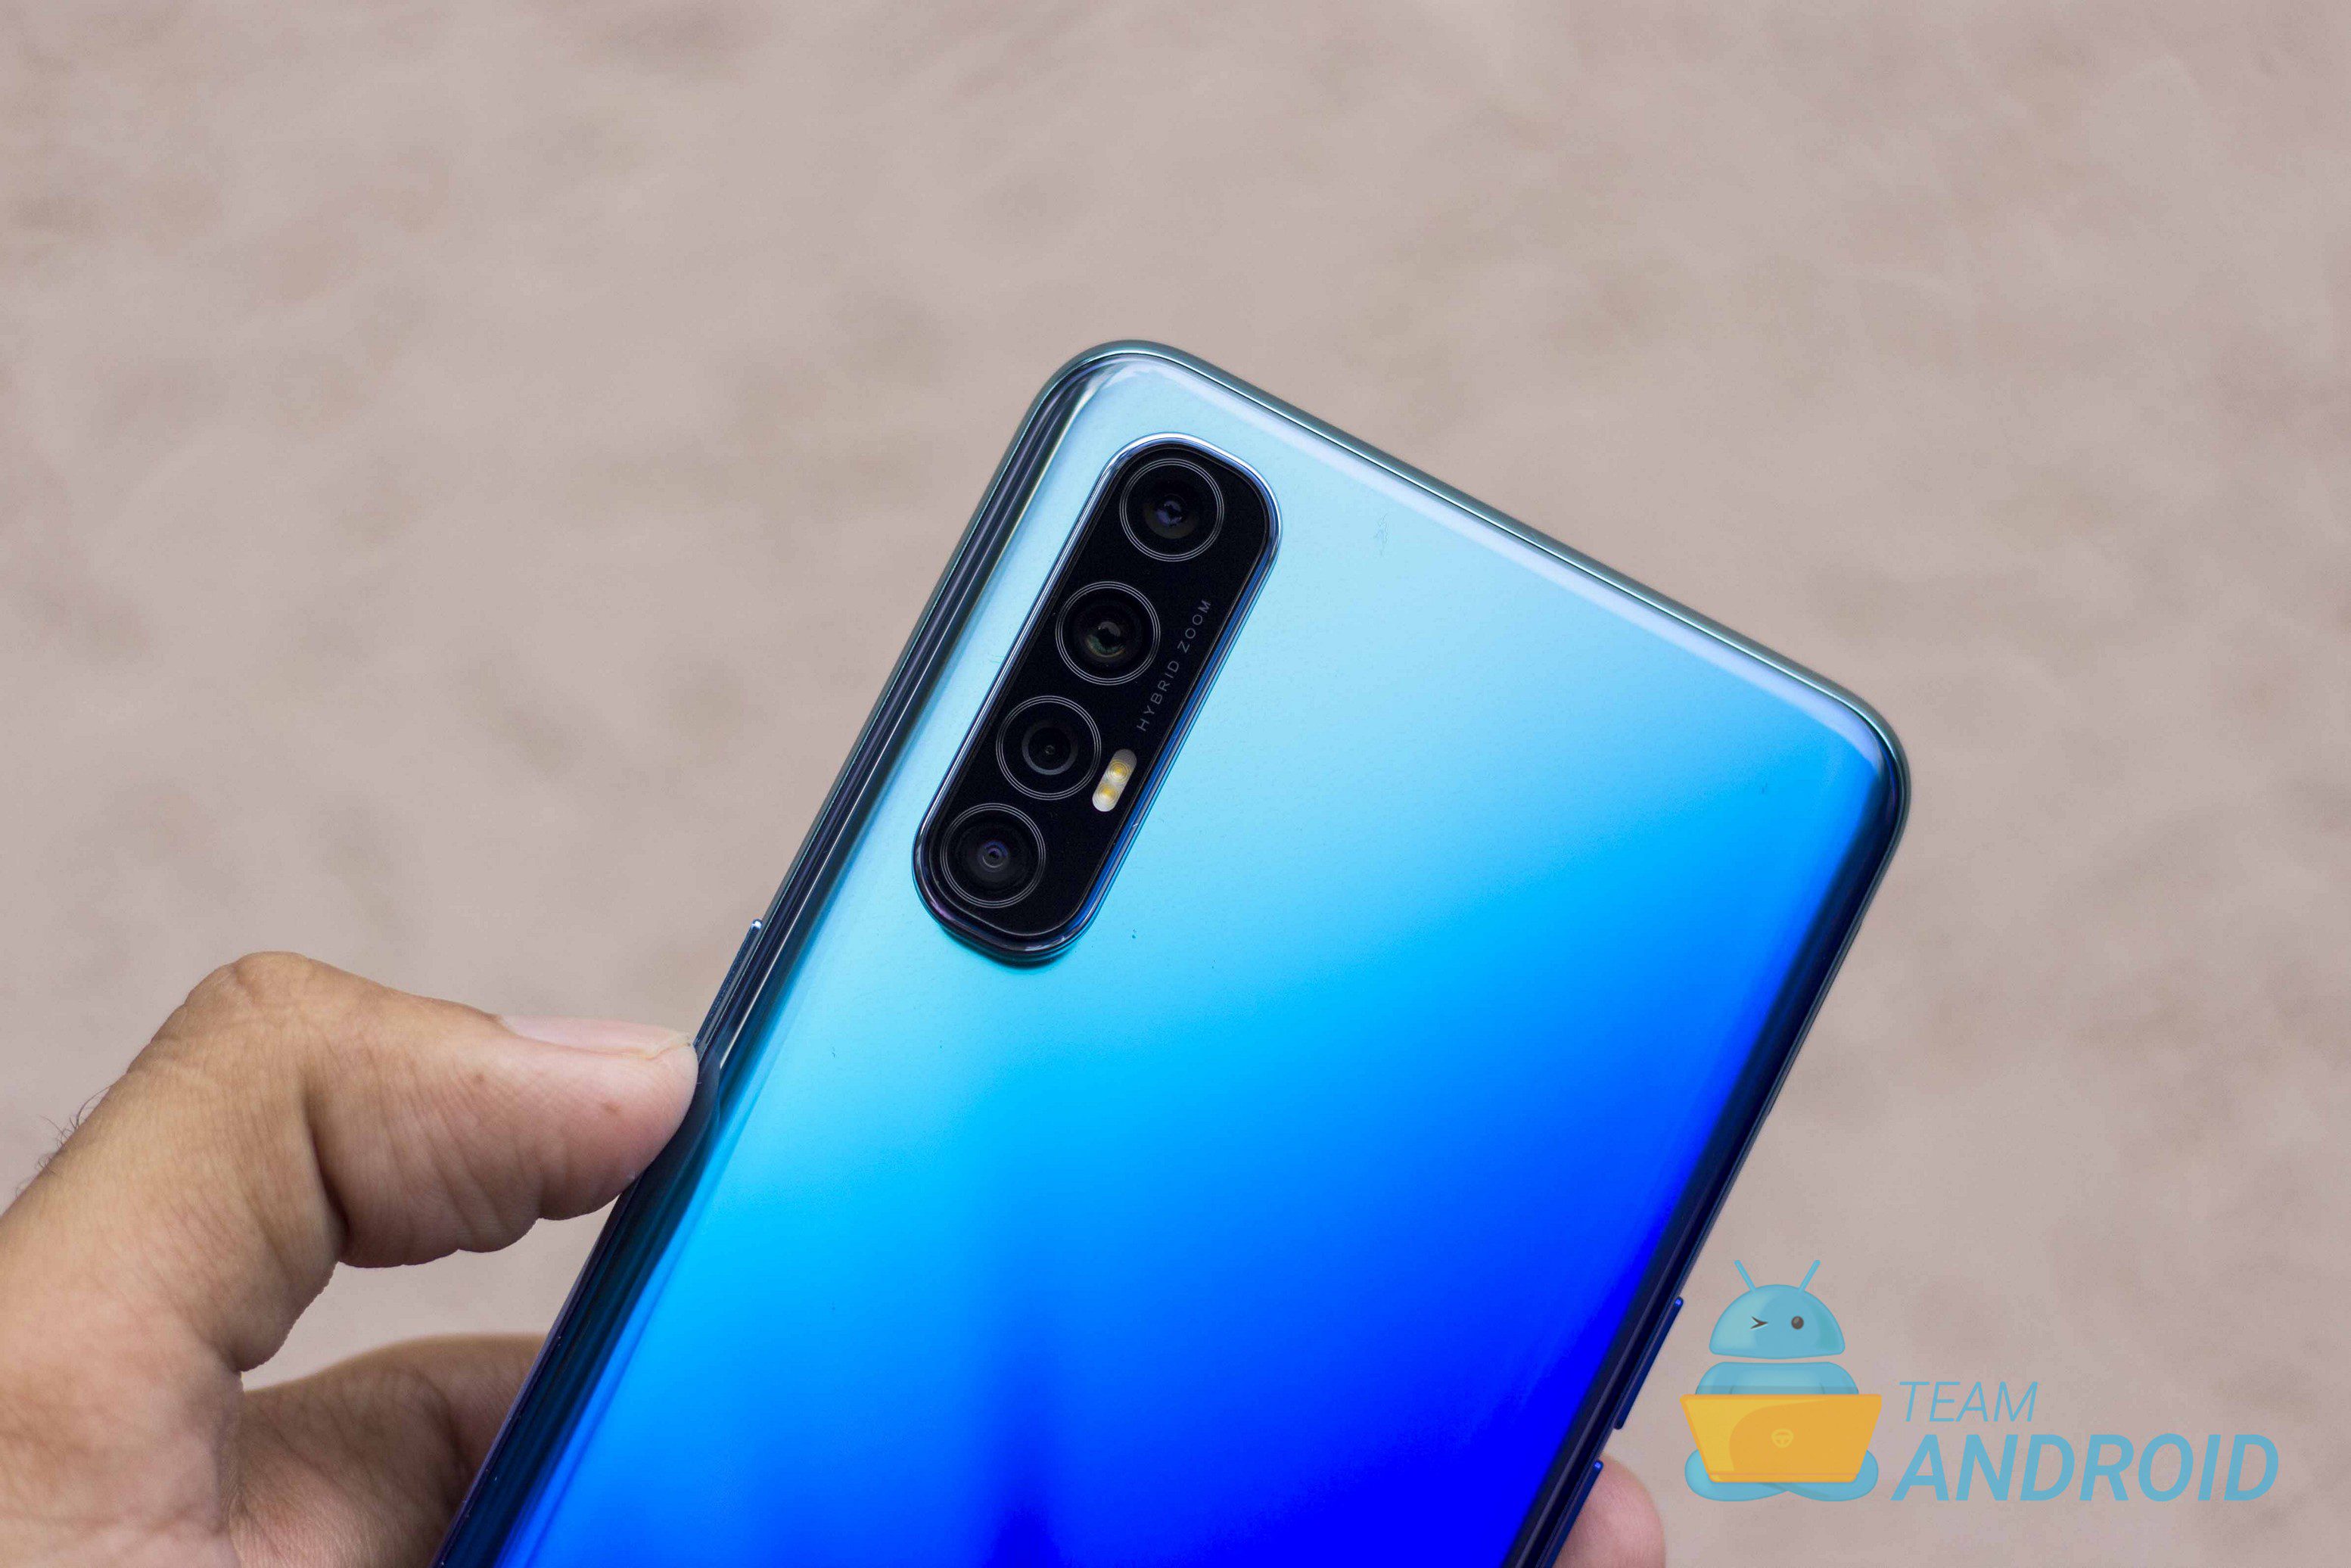 Oppo Reno 3 Pro Review: Is This a Midrange Flagship Phone? 24